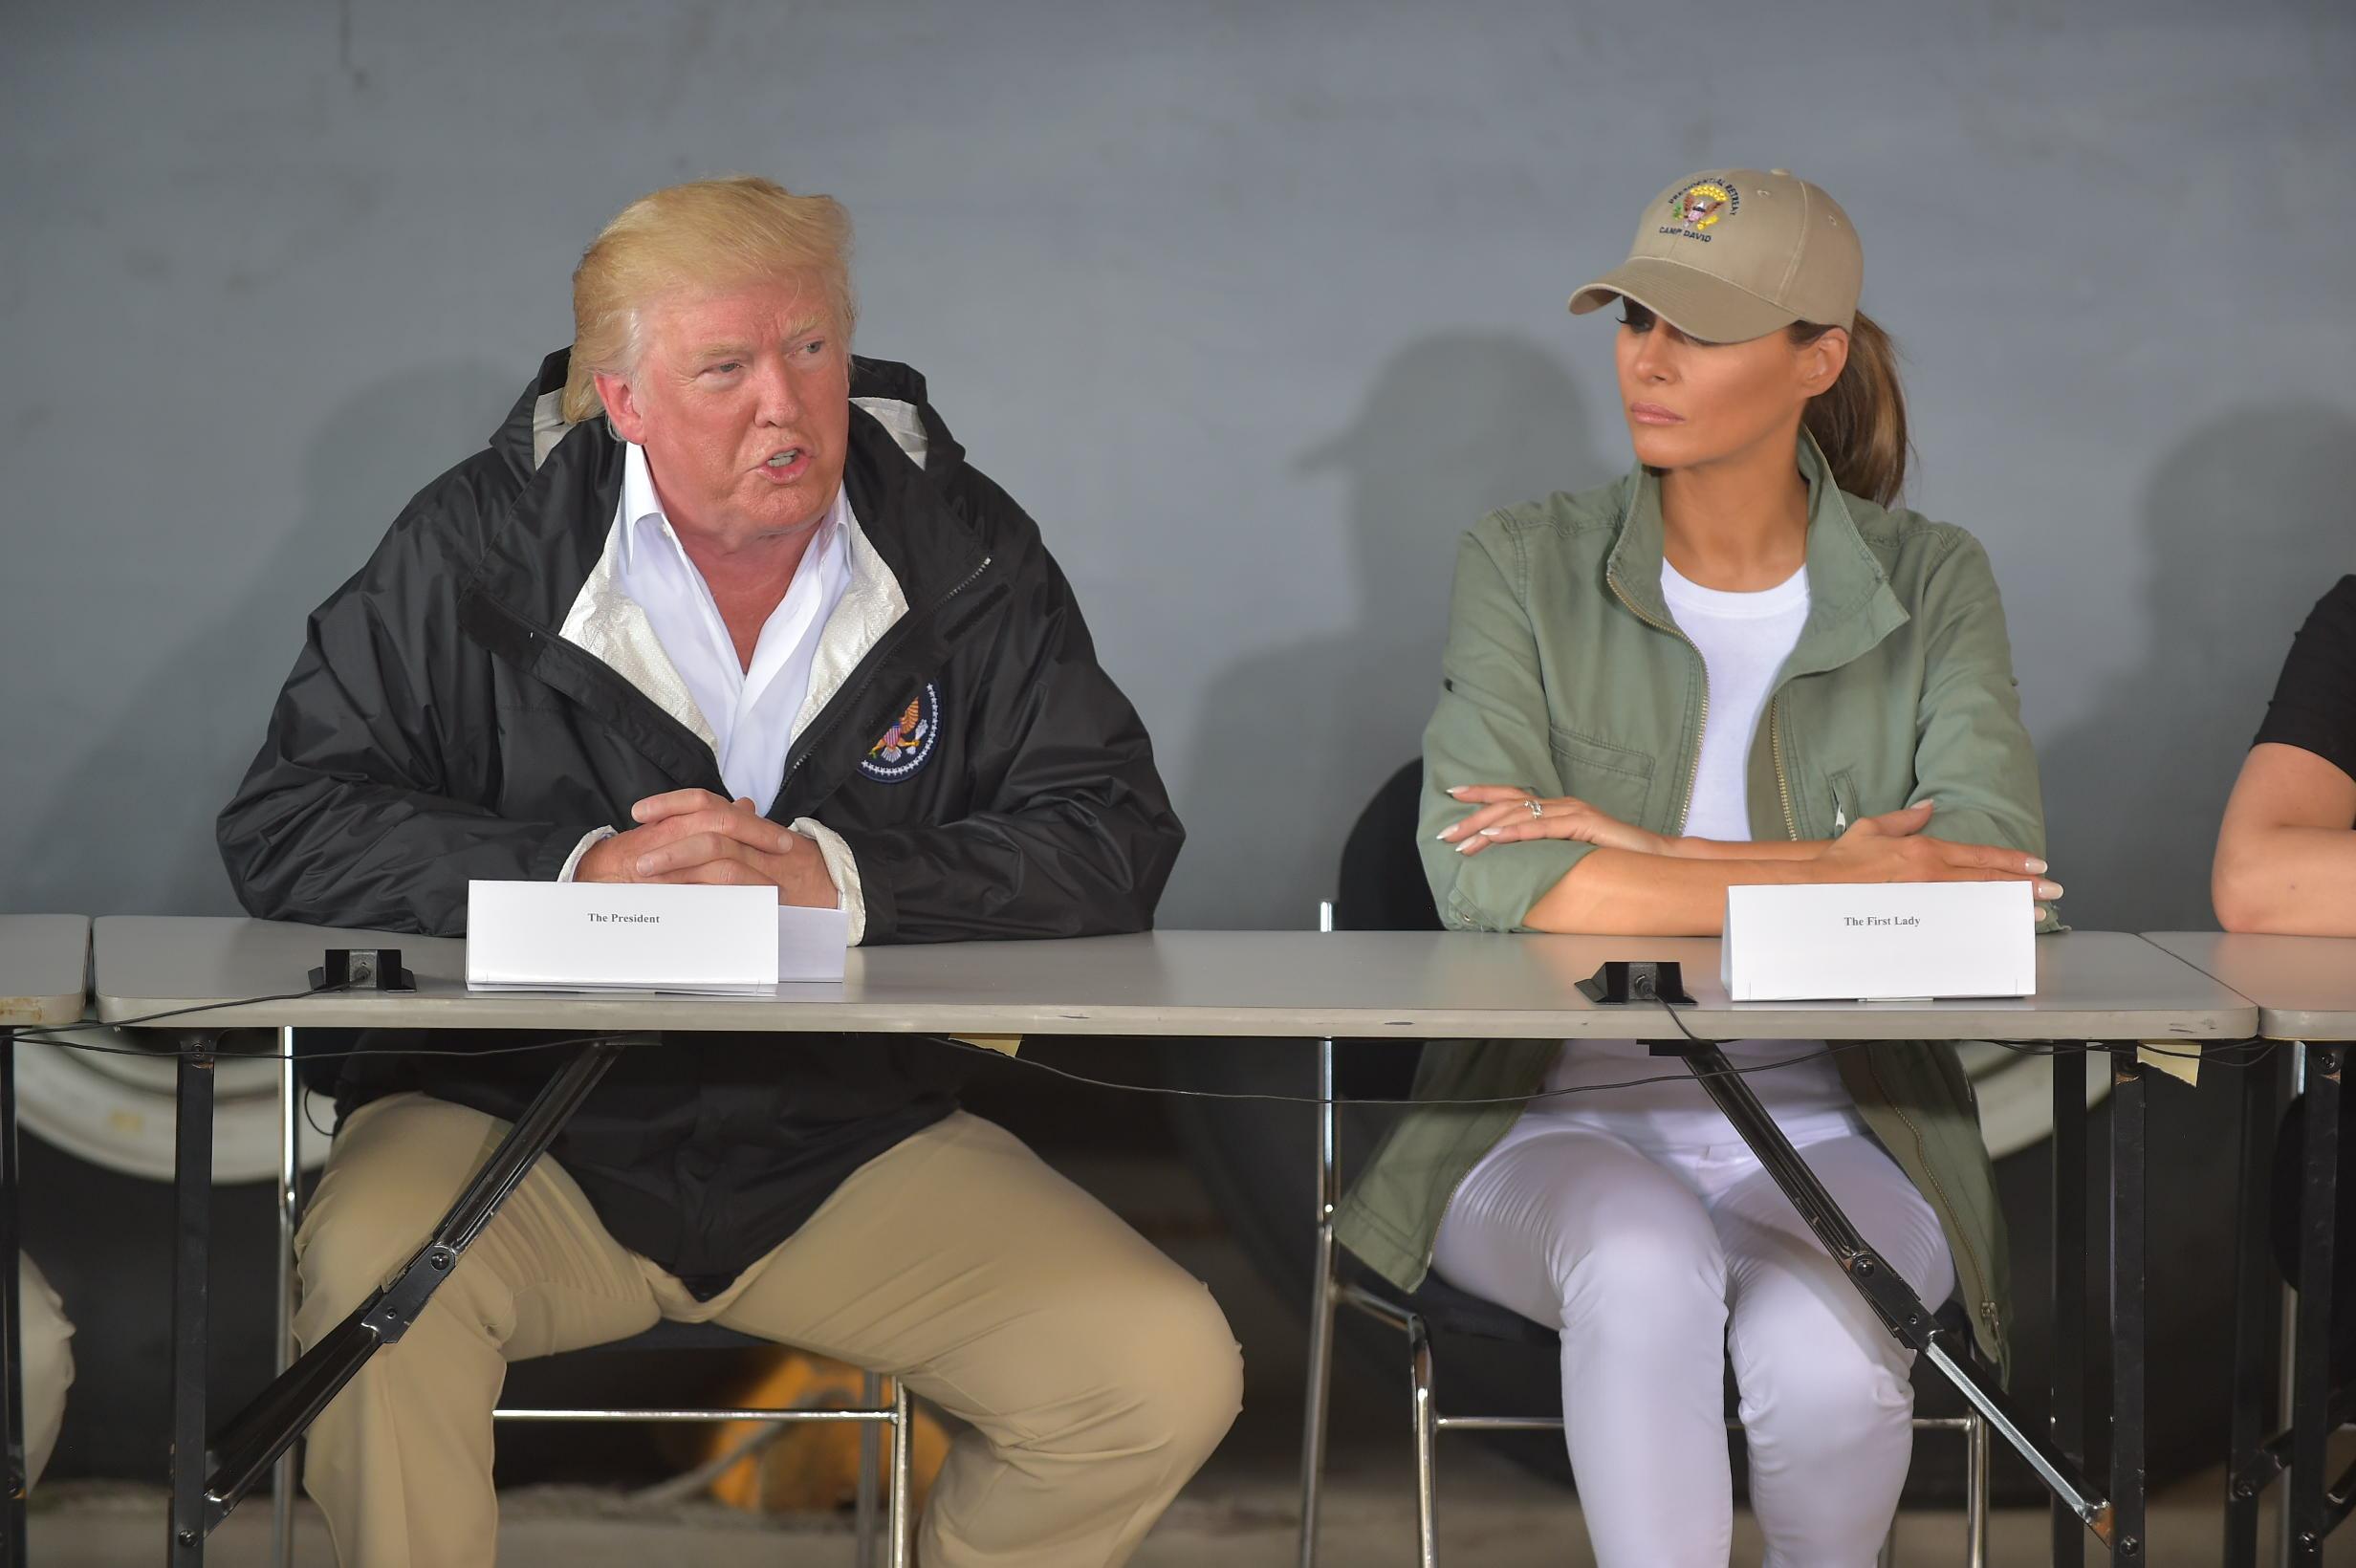 US President Donald Trump and First Lady Melania Trump attend a meeting with Puerto Rico Governor Ricardo Rossello